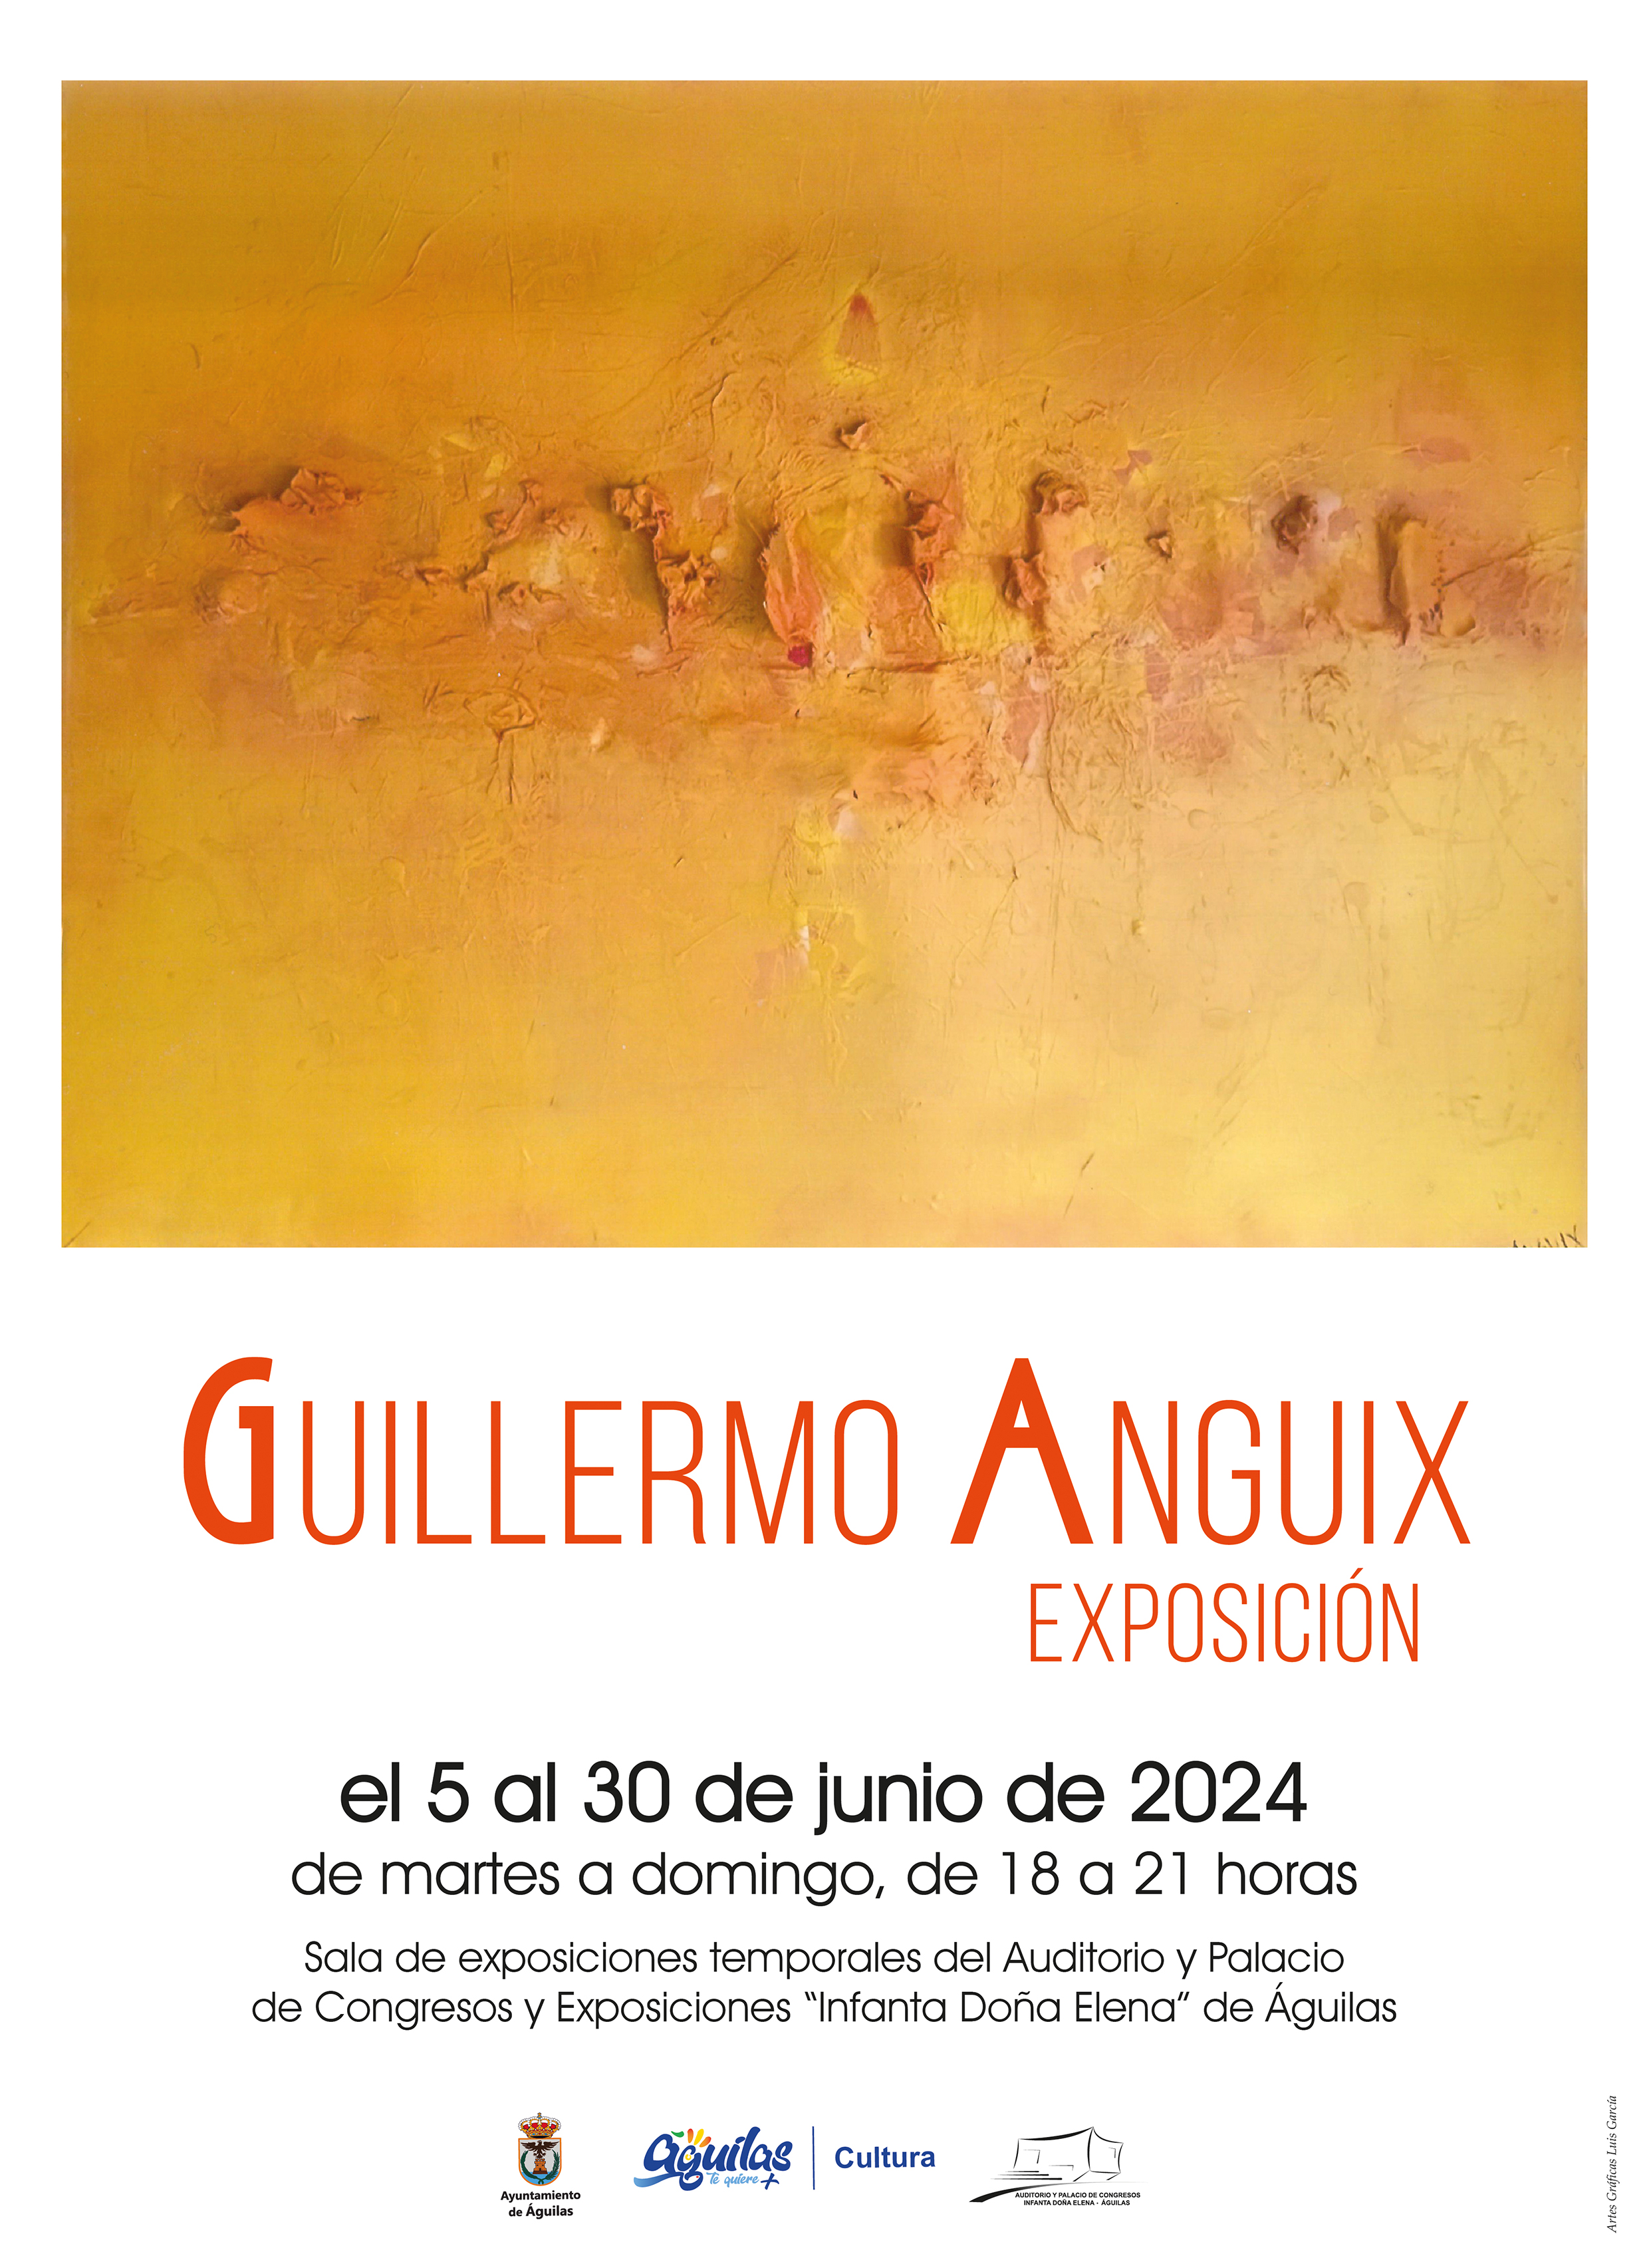 GUILLERMO ANGUIX